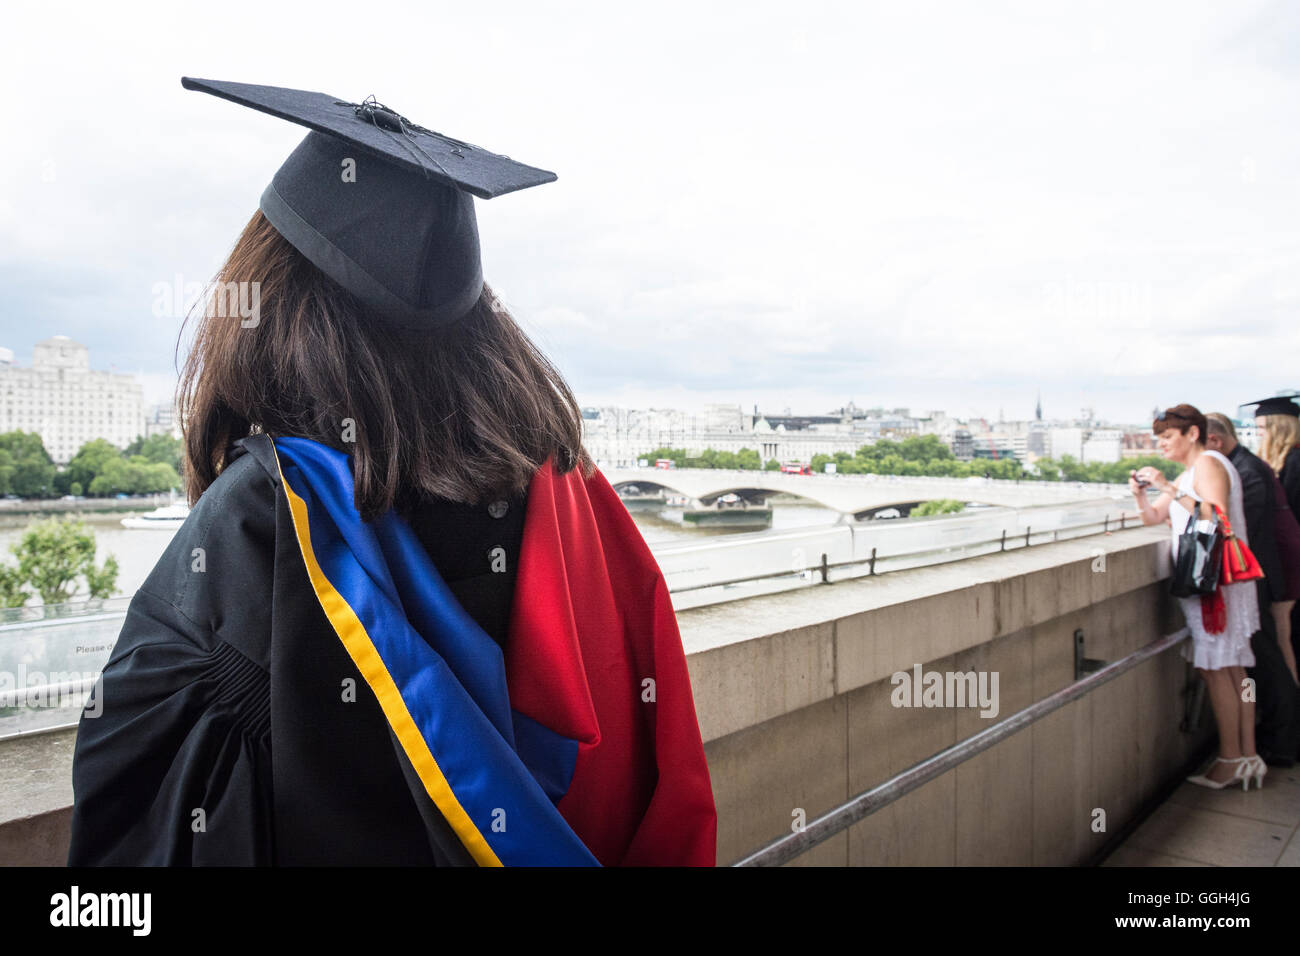 Graduation day - a young university graduate wearing a mortarboard looks towards future horizons from the Royal Festival Hall, London, England, U.K. Stock Photo